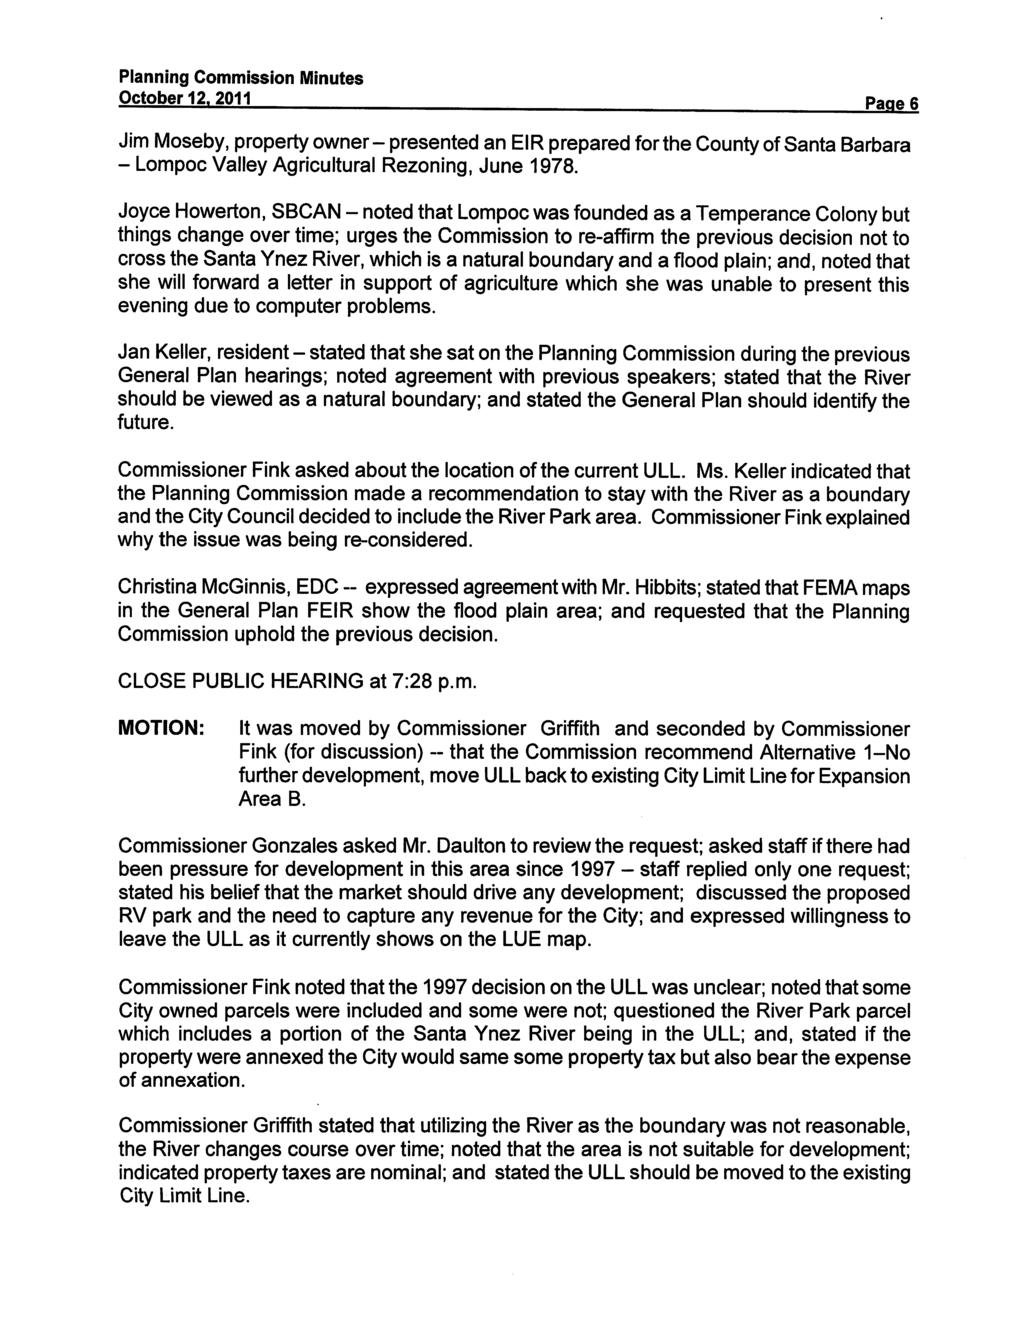 October 12. 2011 page6 Jim Moseby, property owner- presented an EIR prepared for the County of Santa Barbara - Lompoc Valley Agricultural Rezoning, June 1978.